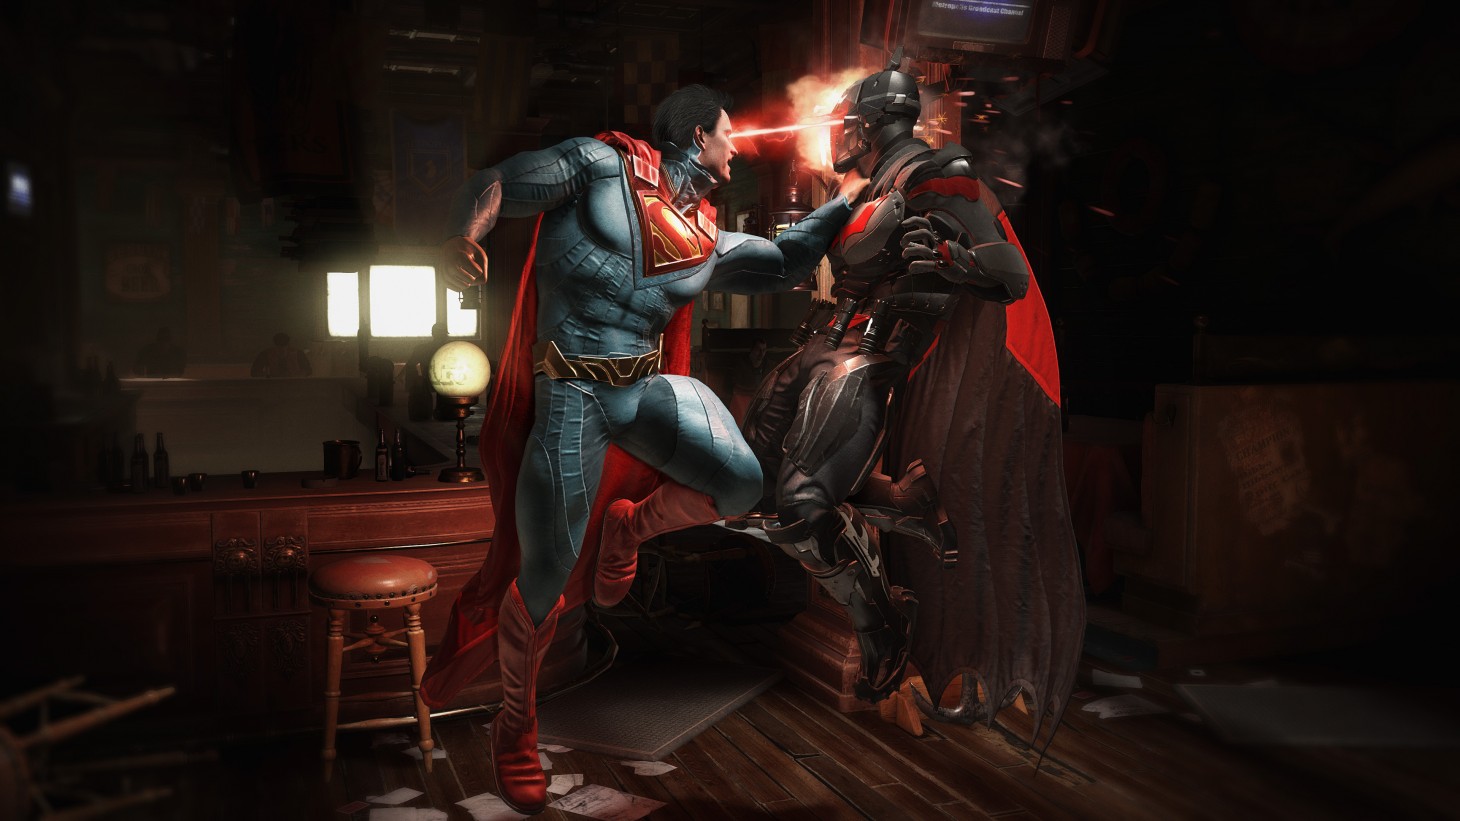 Injustice Animated Movie Stealthily Confirmed By DC - Game Informer